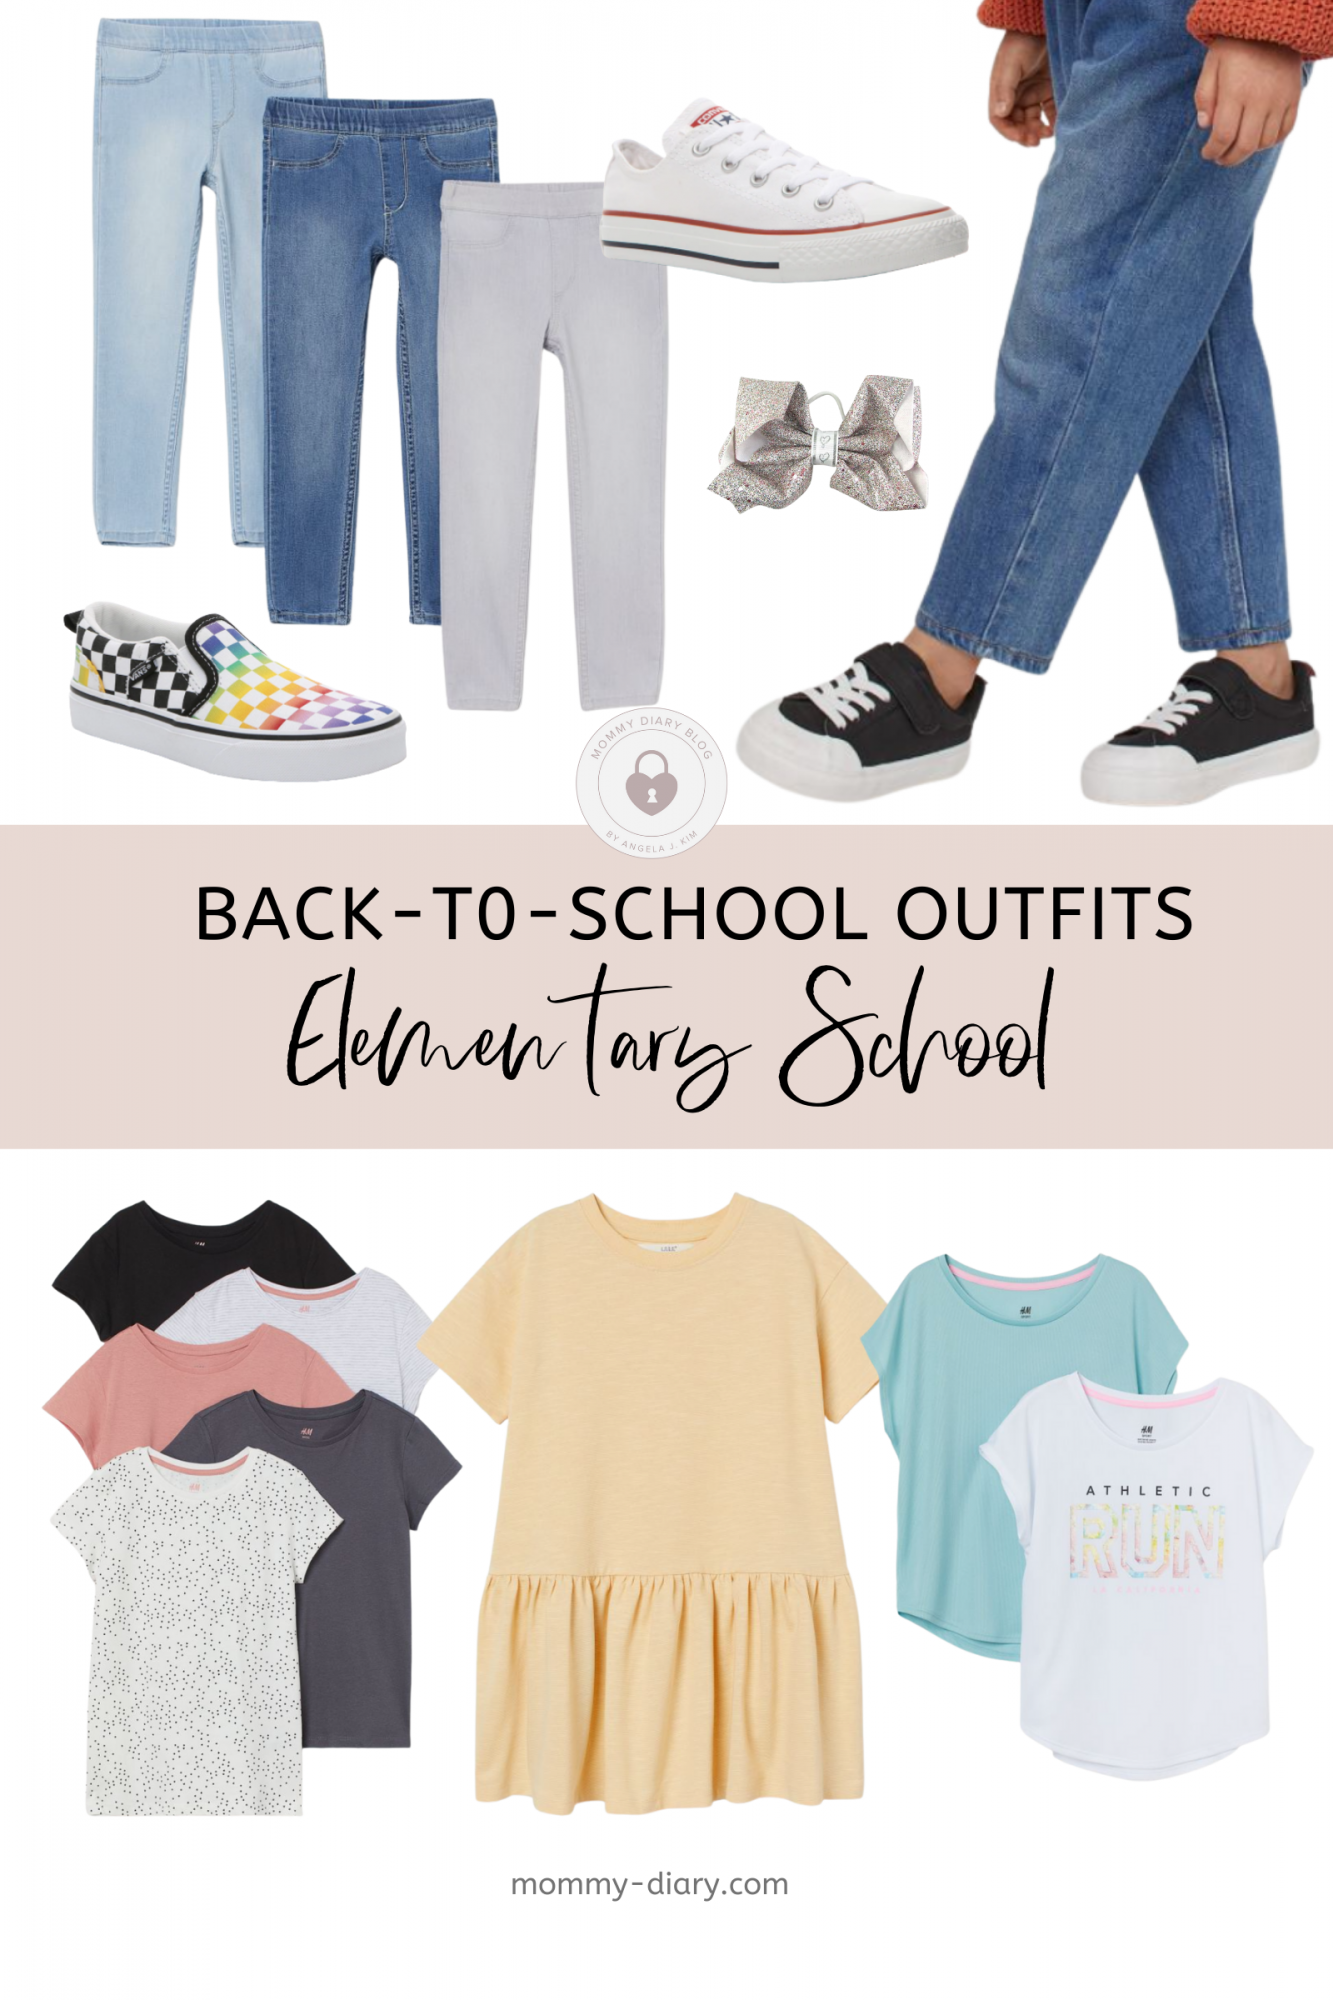 Back-to-School Elementary School Outfits